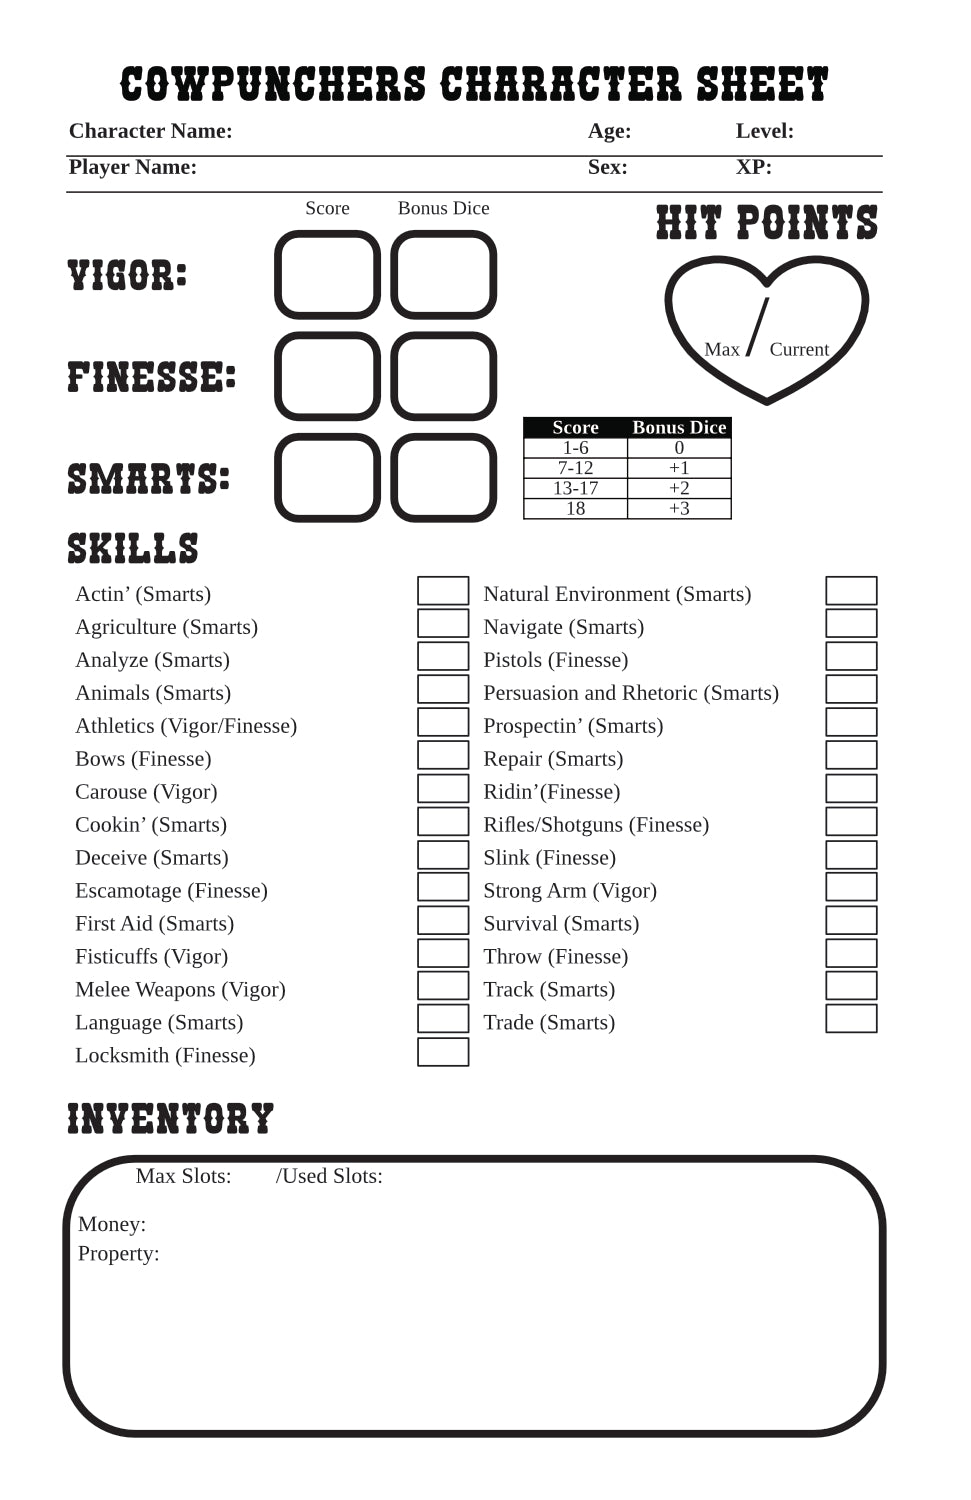 Cowpunchers Reloaded Character Sheet